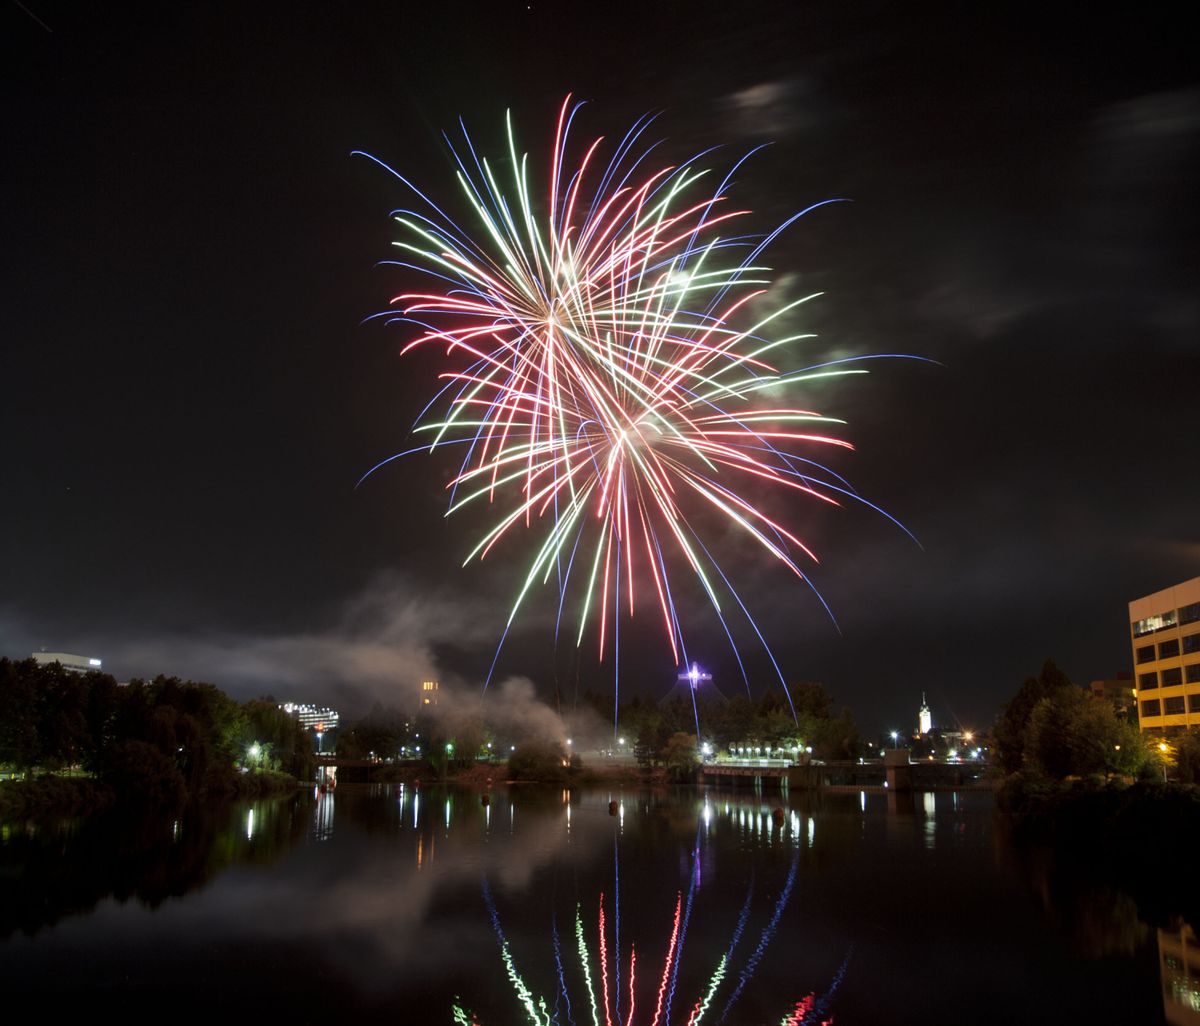 Fireworks light up the night sky at the conclusion of the 35th Allegro Baroque and Beyond Royal Fireworks Concert on Sunday in Spokane’s Riverfront Park. The performance was the last one by the longtime presenter. (Dan Pelle)